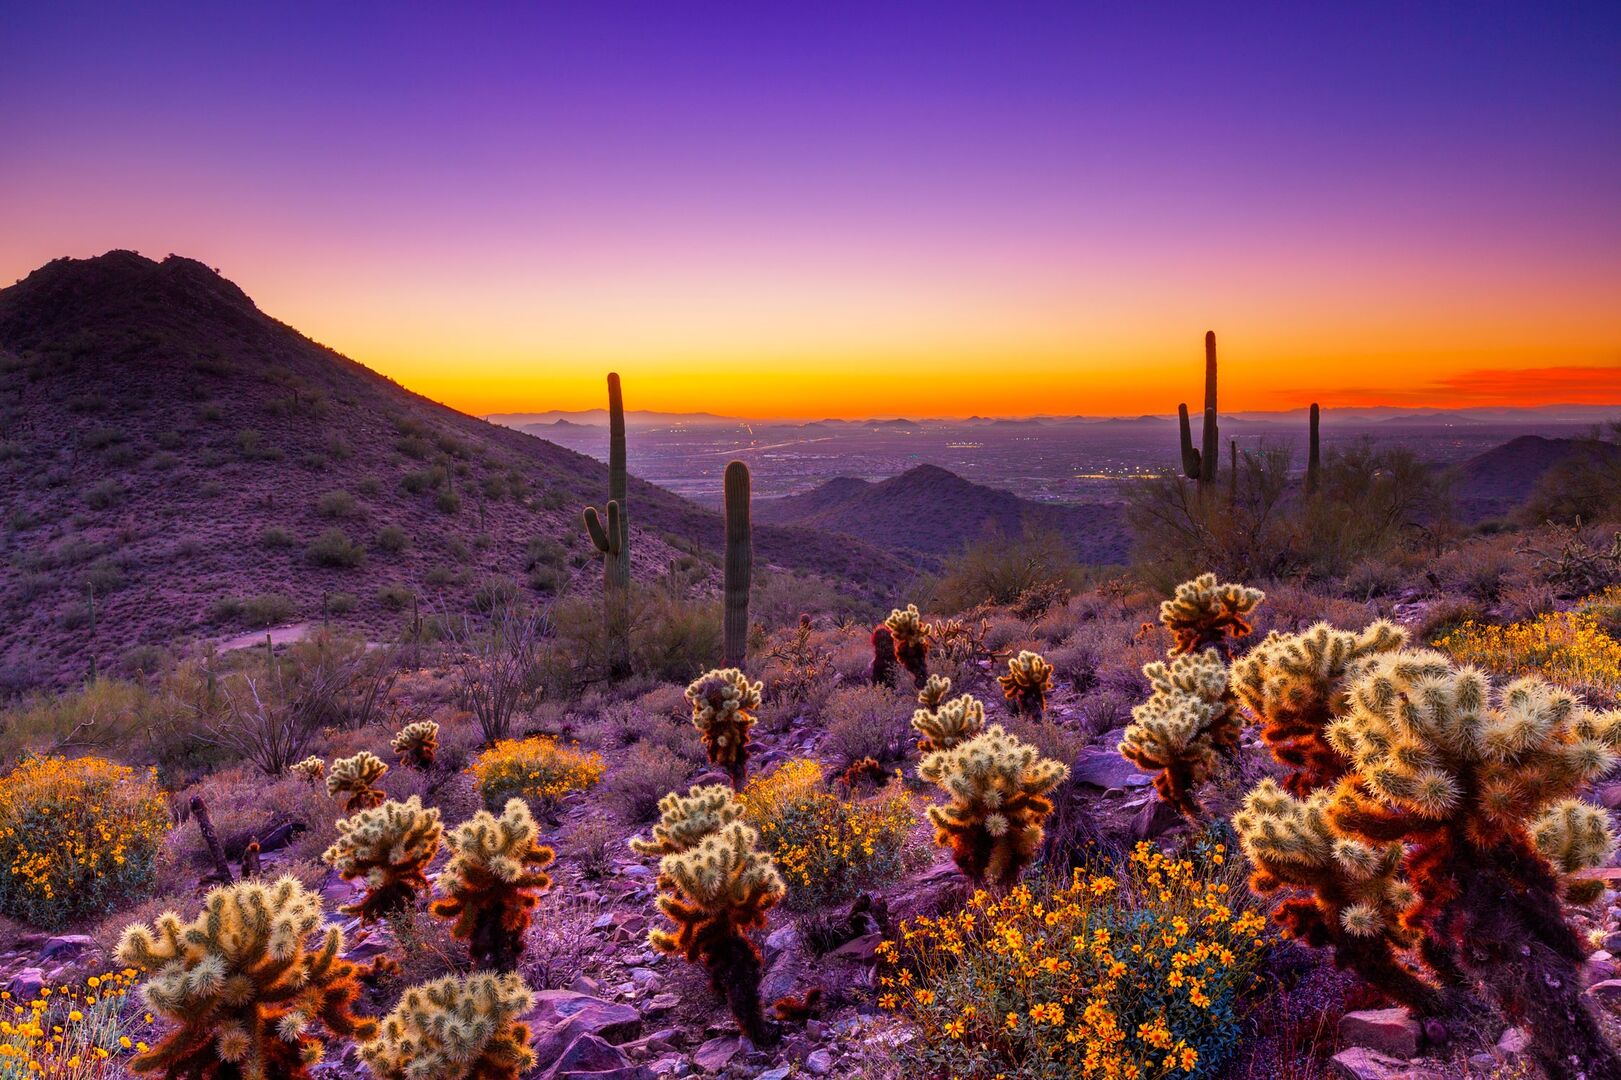 Explore the many places to hike around town. They don't make sunsets like these everywhere.